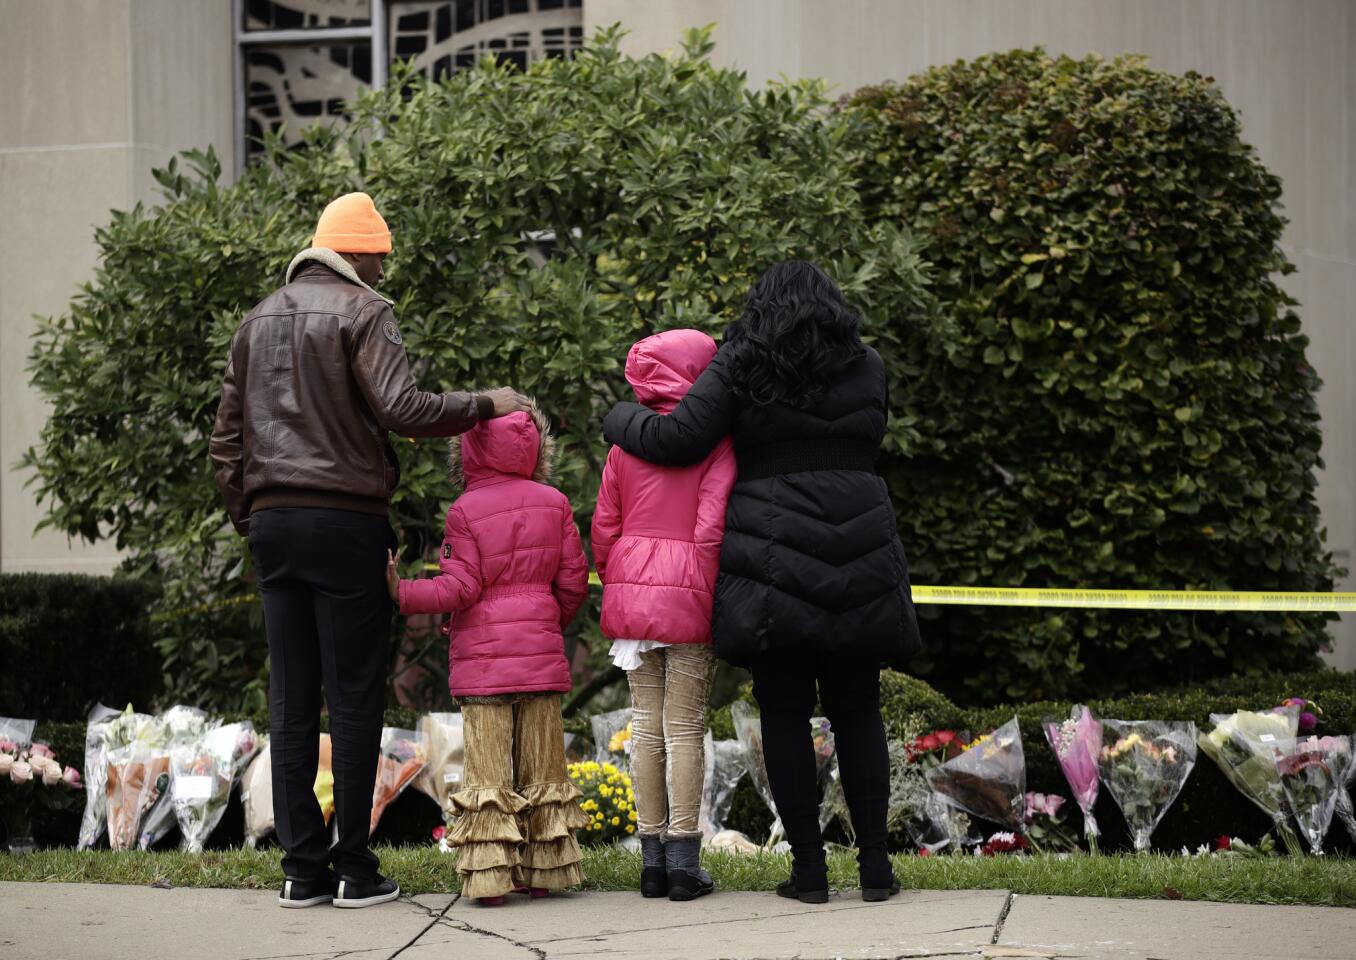 Mourners view a row of flowers at a memorial for the victims of the Tree of Life Synagogue shooting in Pittsburgh on Sunday.